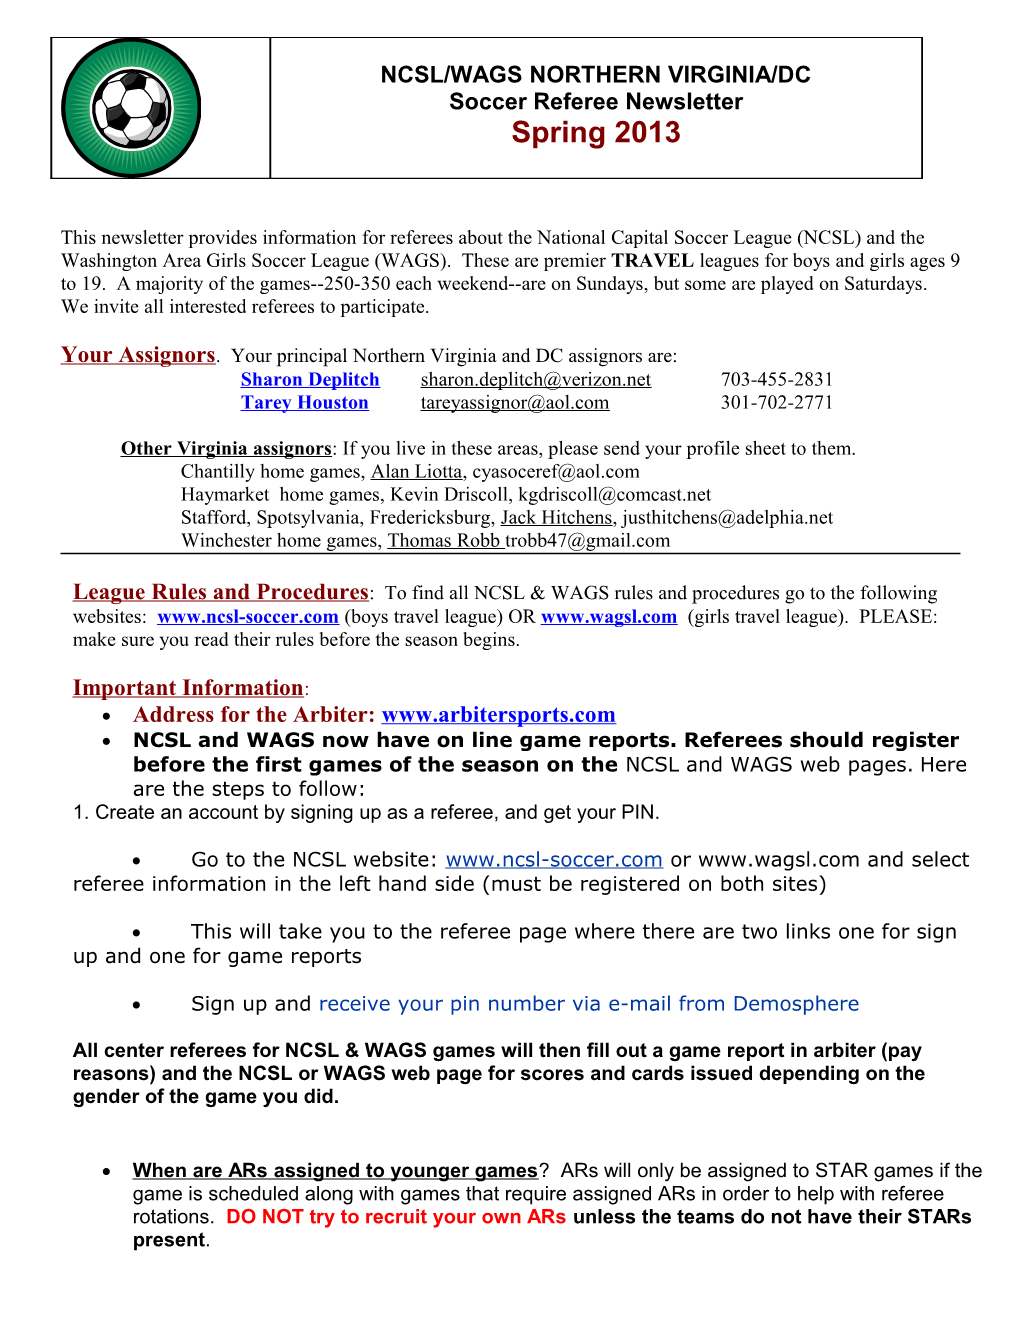 This Newsletter Provides Information About the National Capital Soccer League (NCSL) And